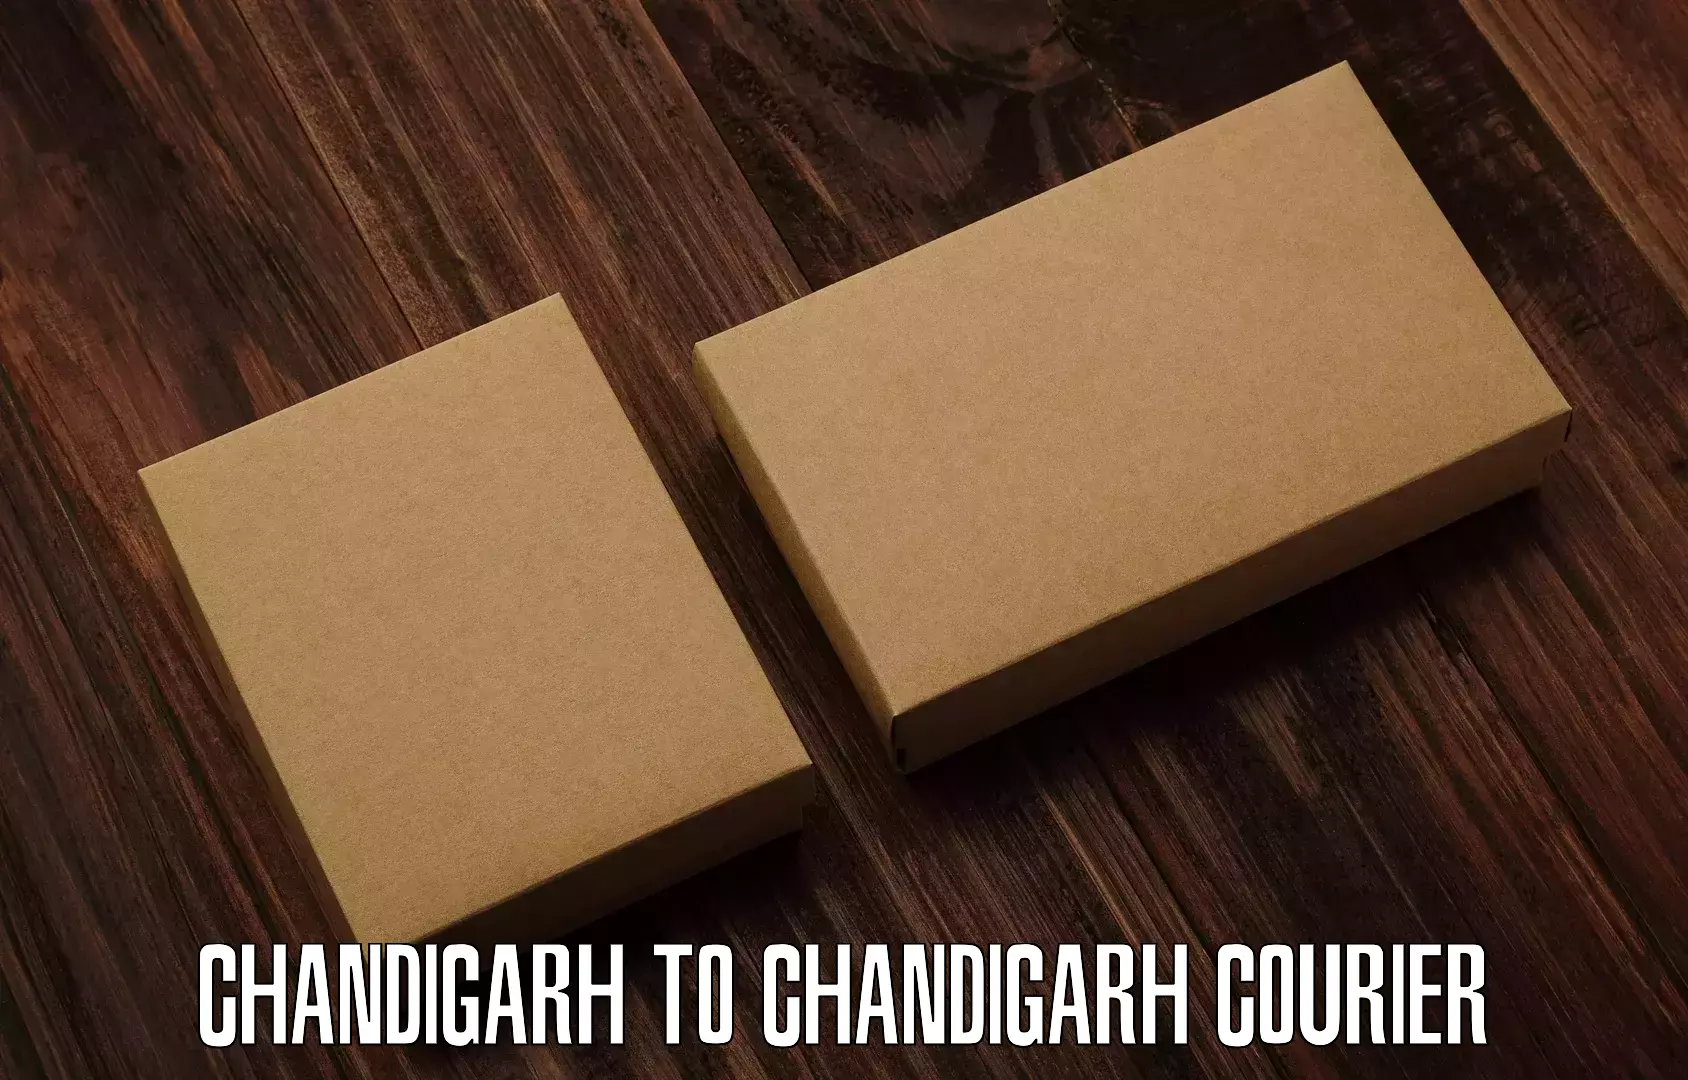 Global courier networks Chandigarh to Chandigarh